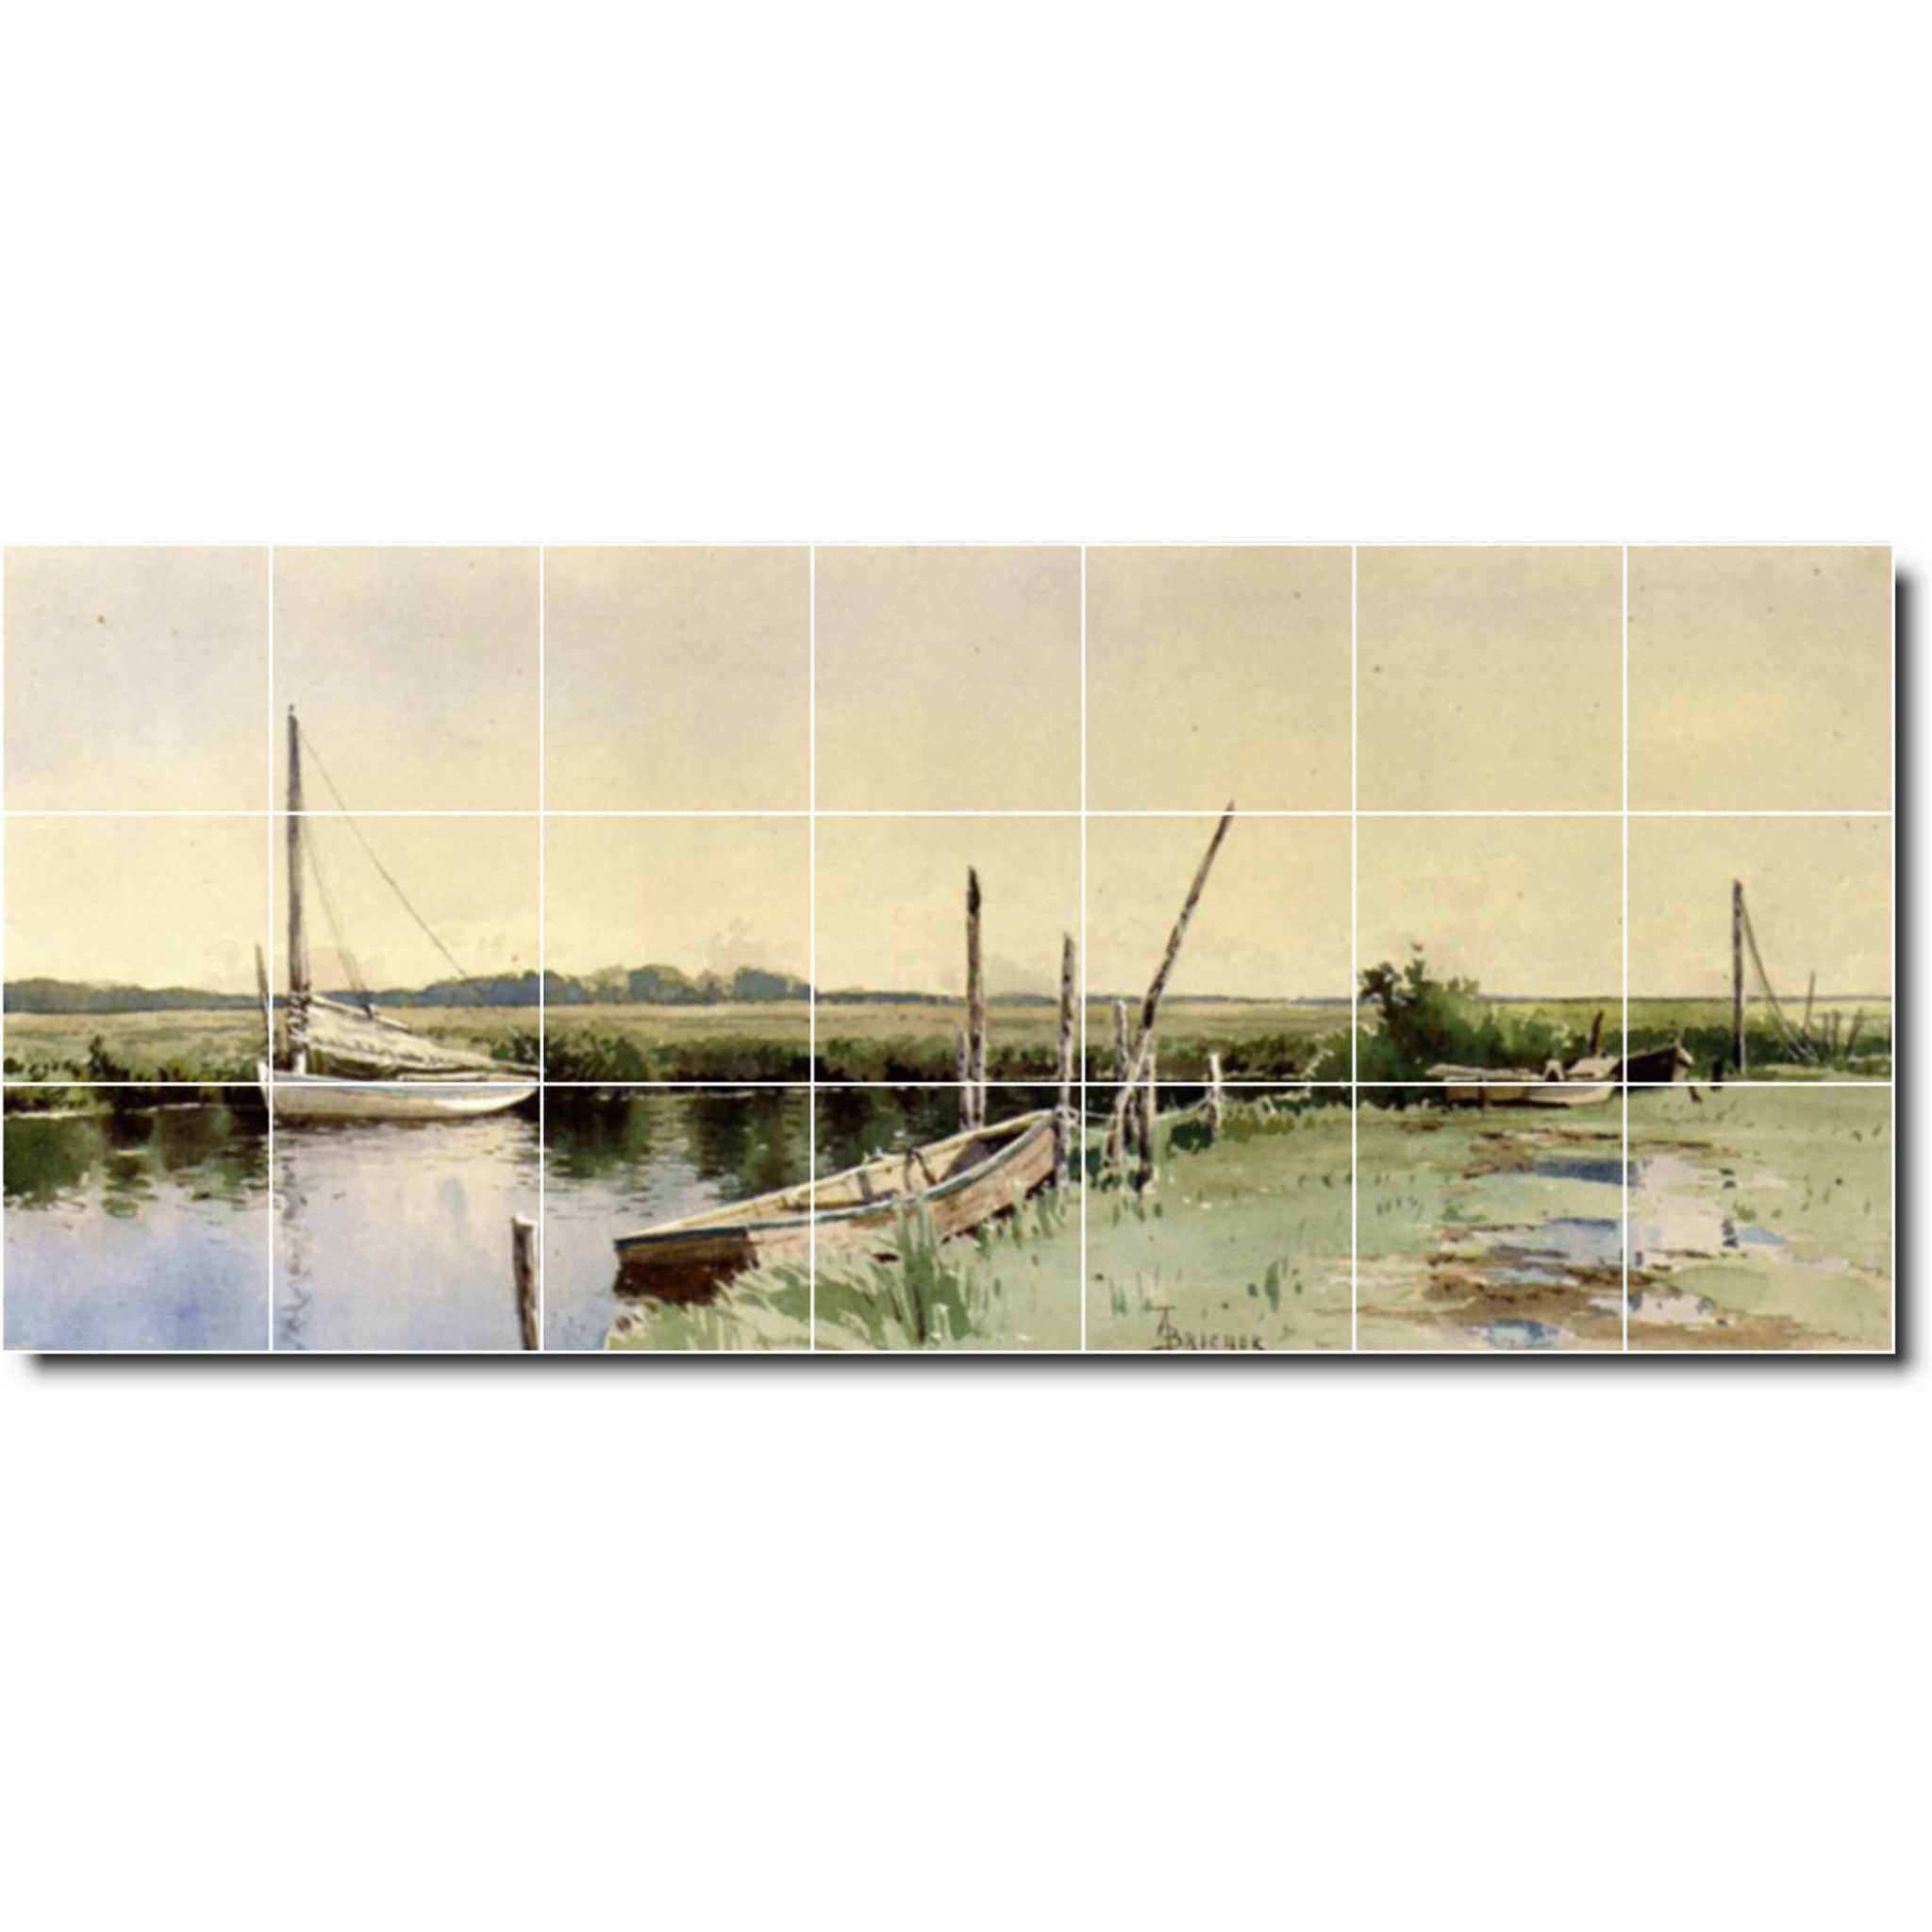 alfred bricher waterfront painting ceramic tile mural p01059